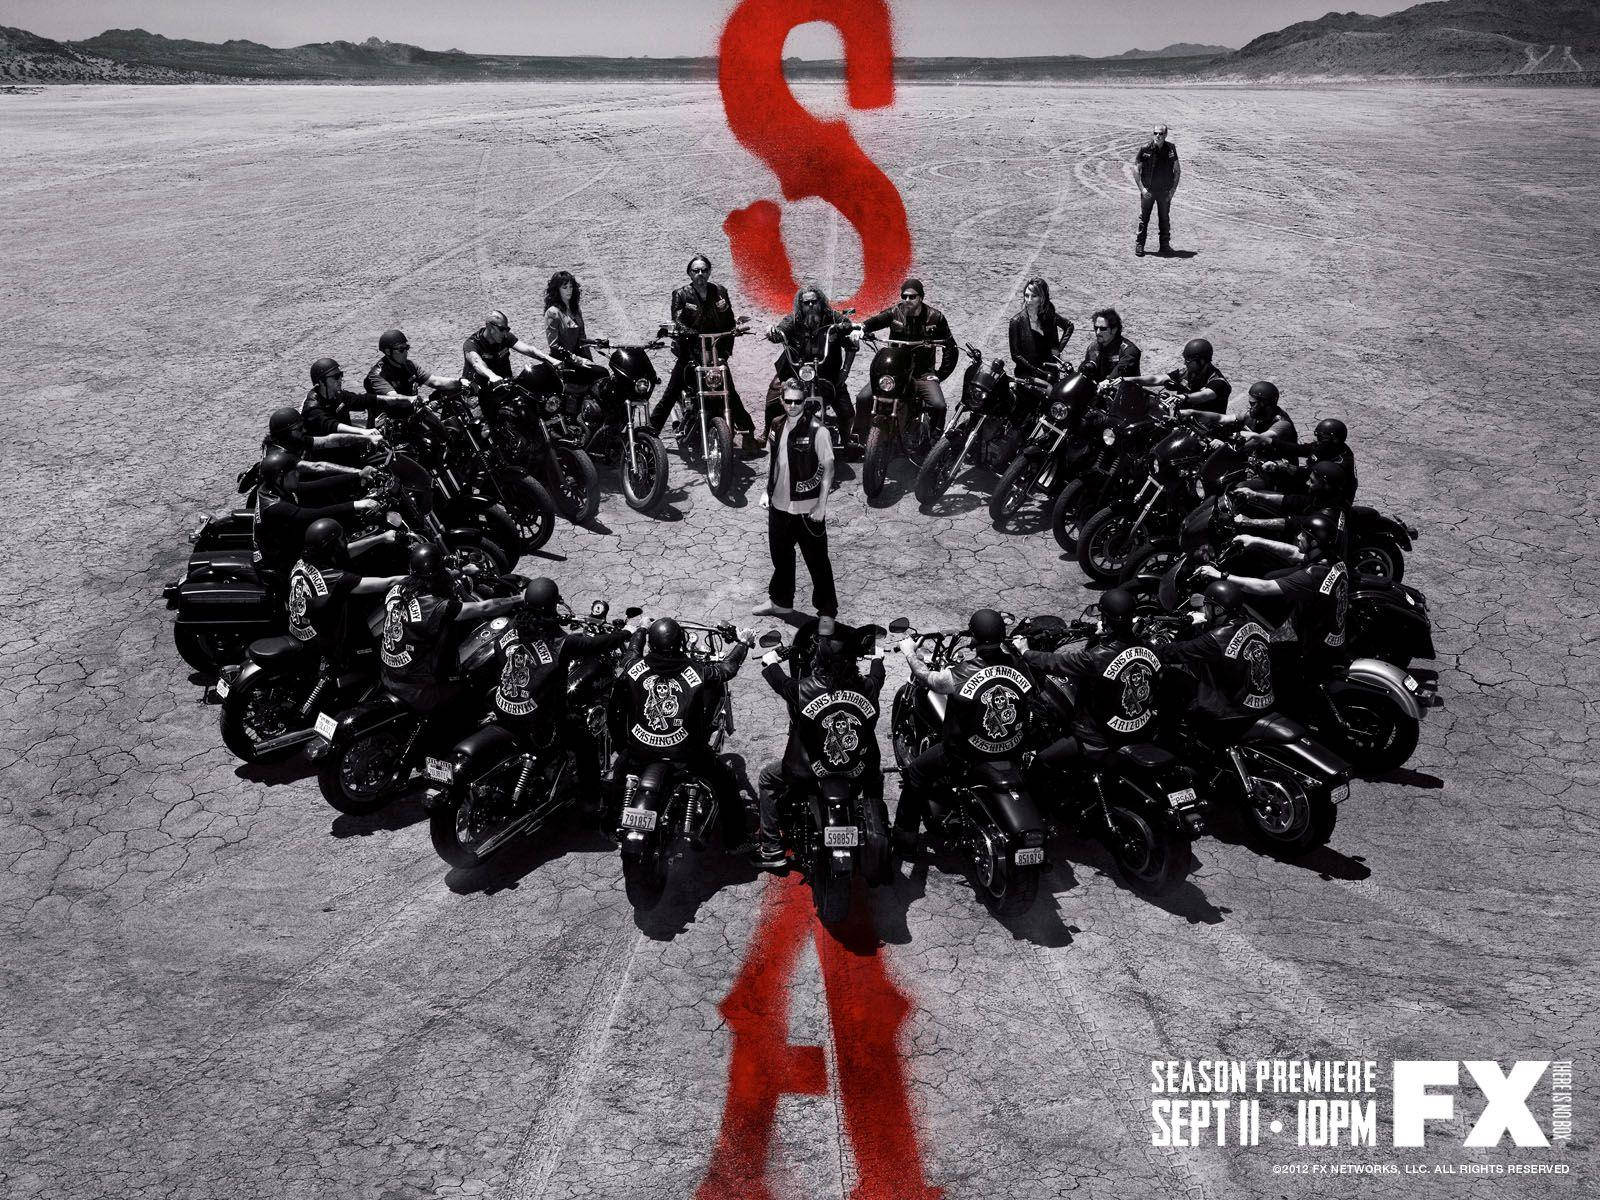 The Poster For The Season Of Sons Of Anarchy